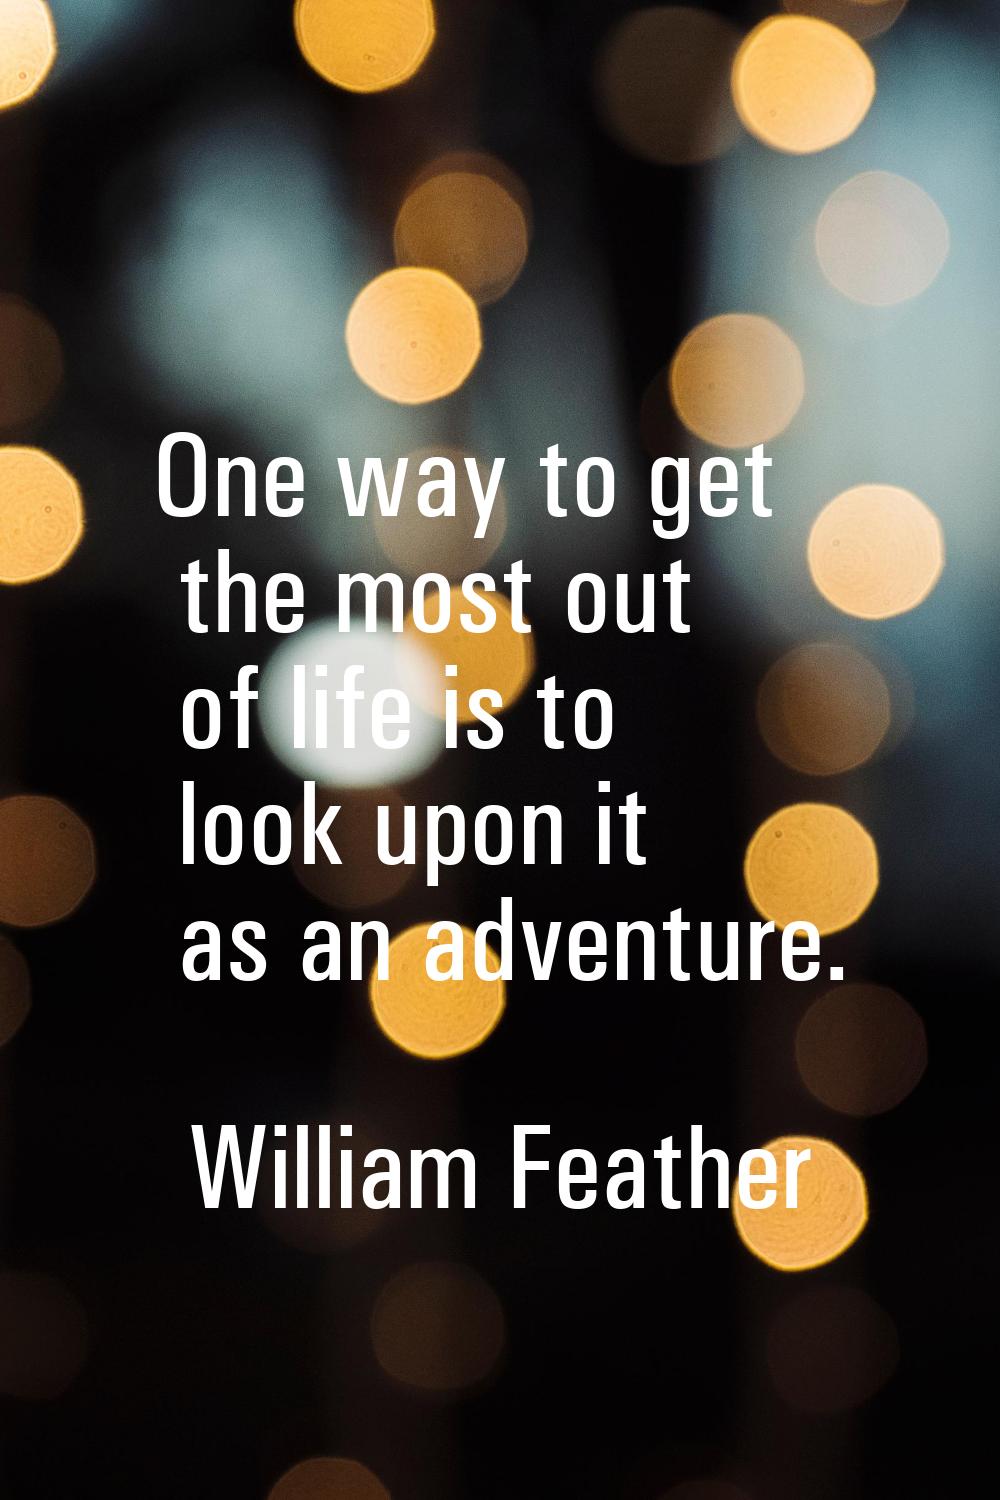 One way to get the most out of life is to look upon it as an adventure.